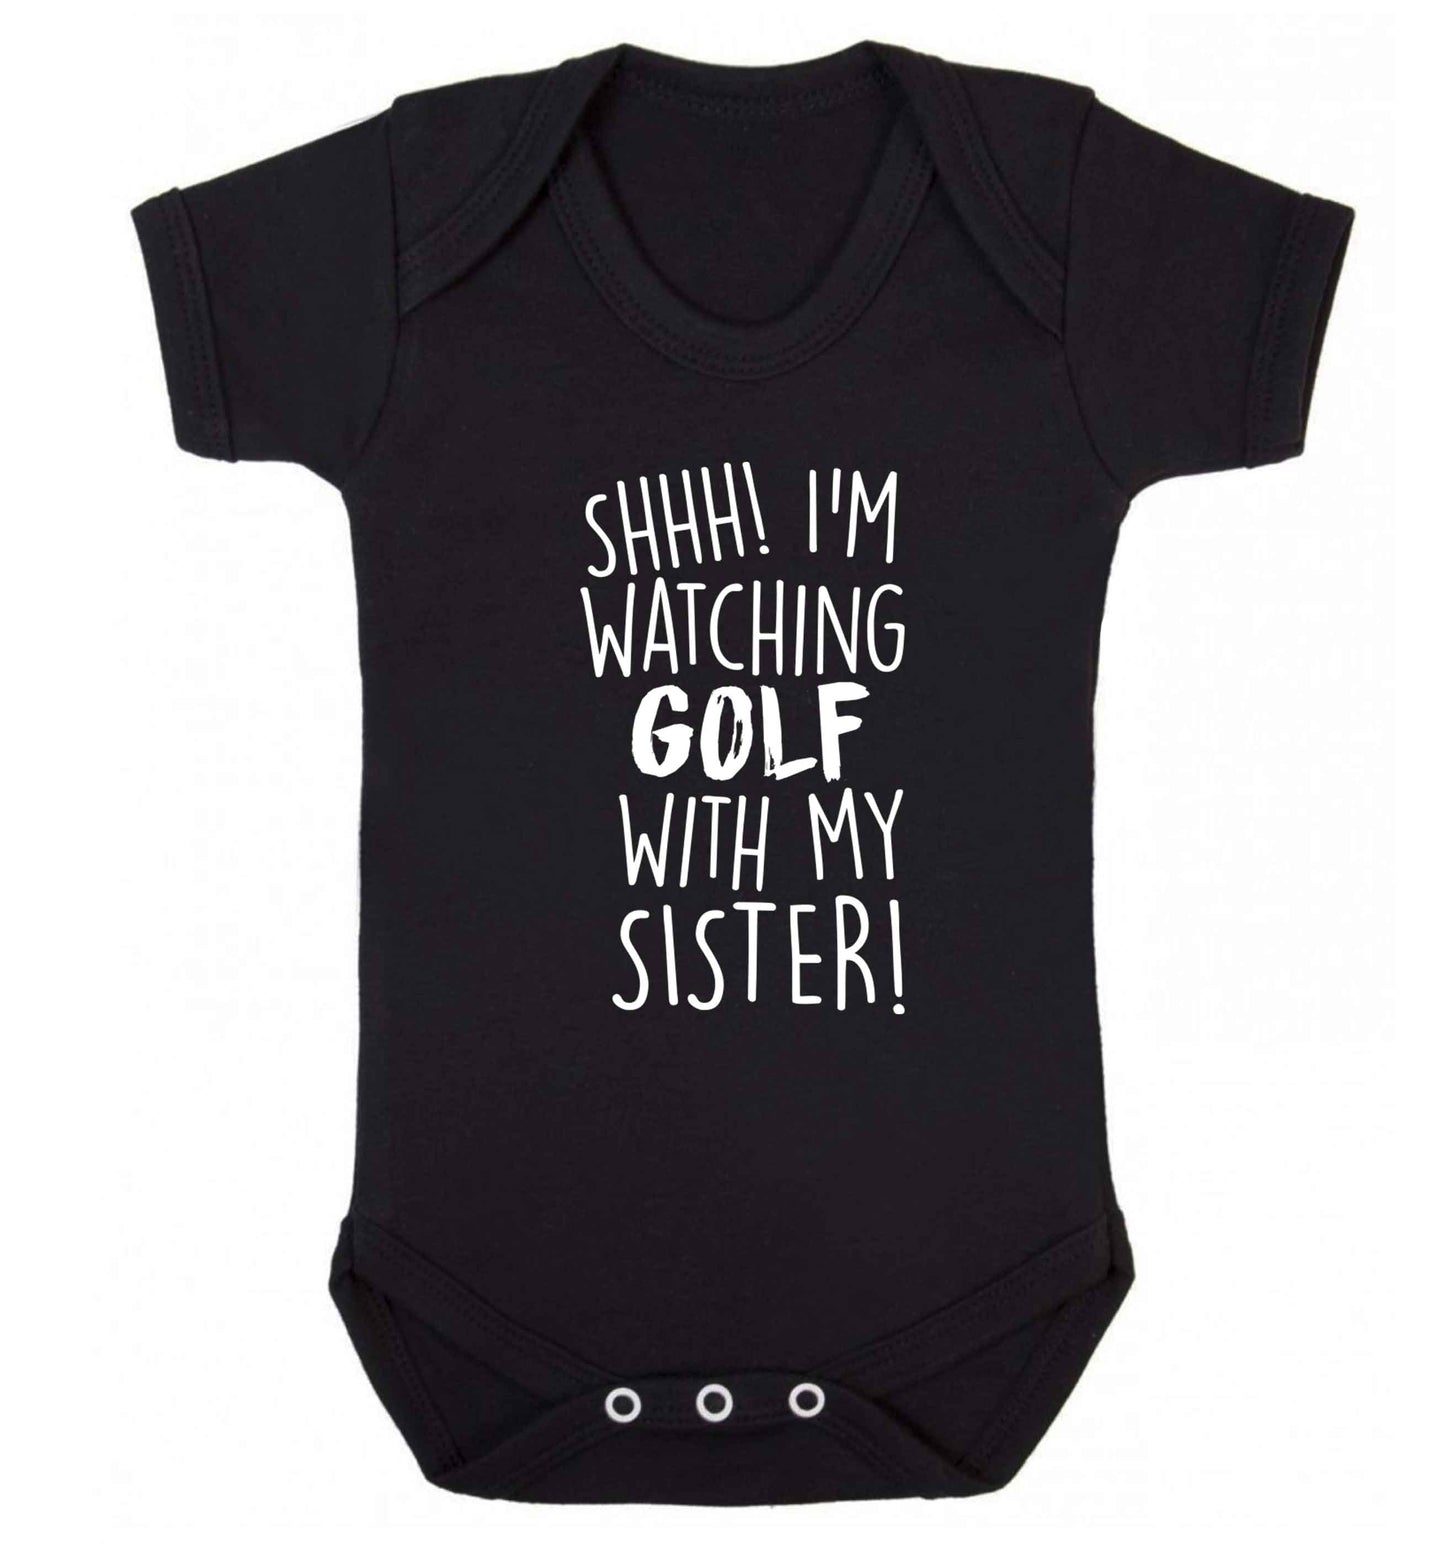 Shh I'm watching golf with my sister Baby Vest black 18-24 months